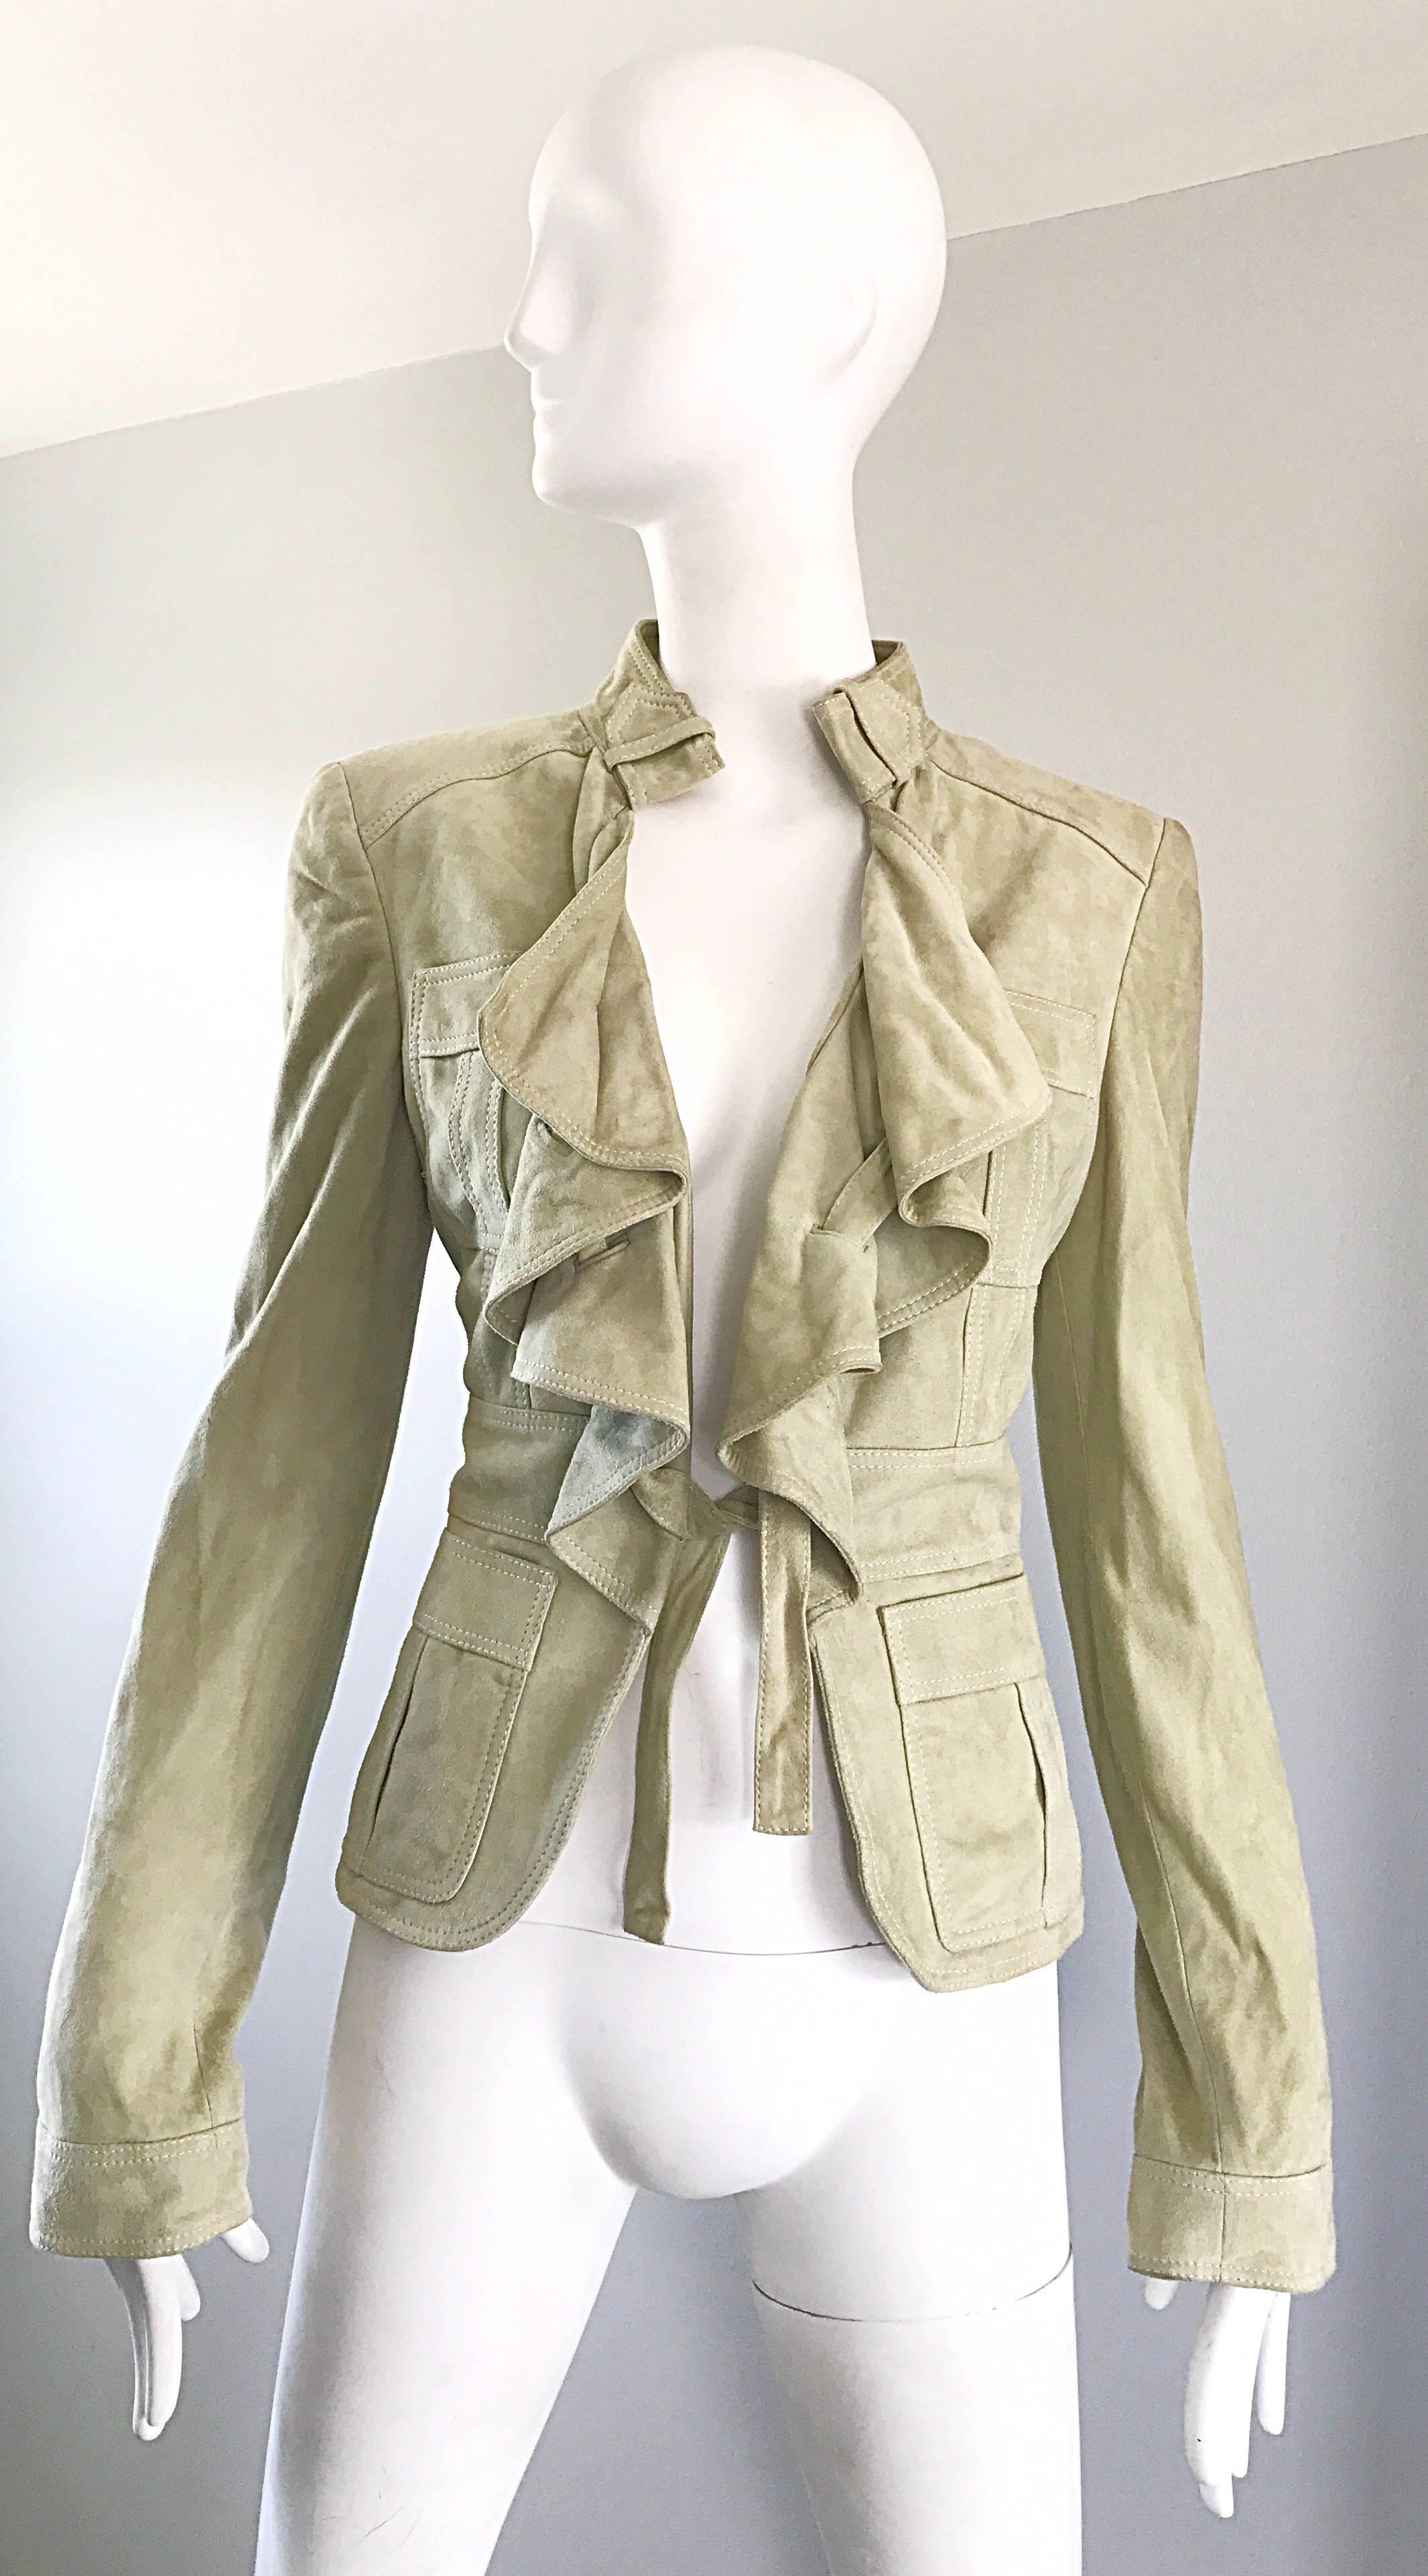 Tom Ford for Gucci Pistachio Khaki Suede Leather 1990s Vintage Ruffle Jacket  3